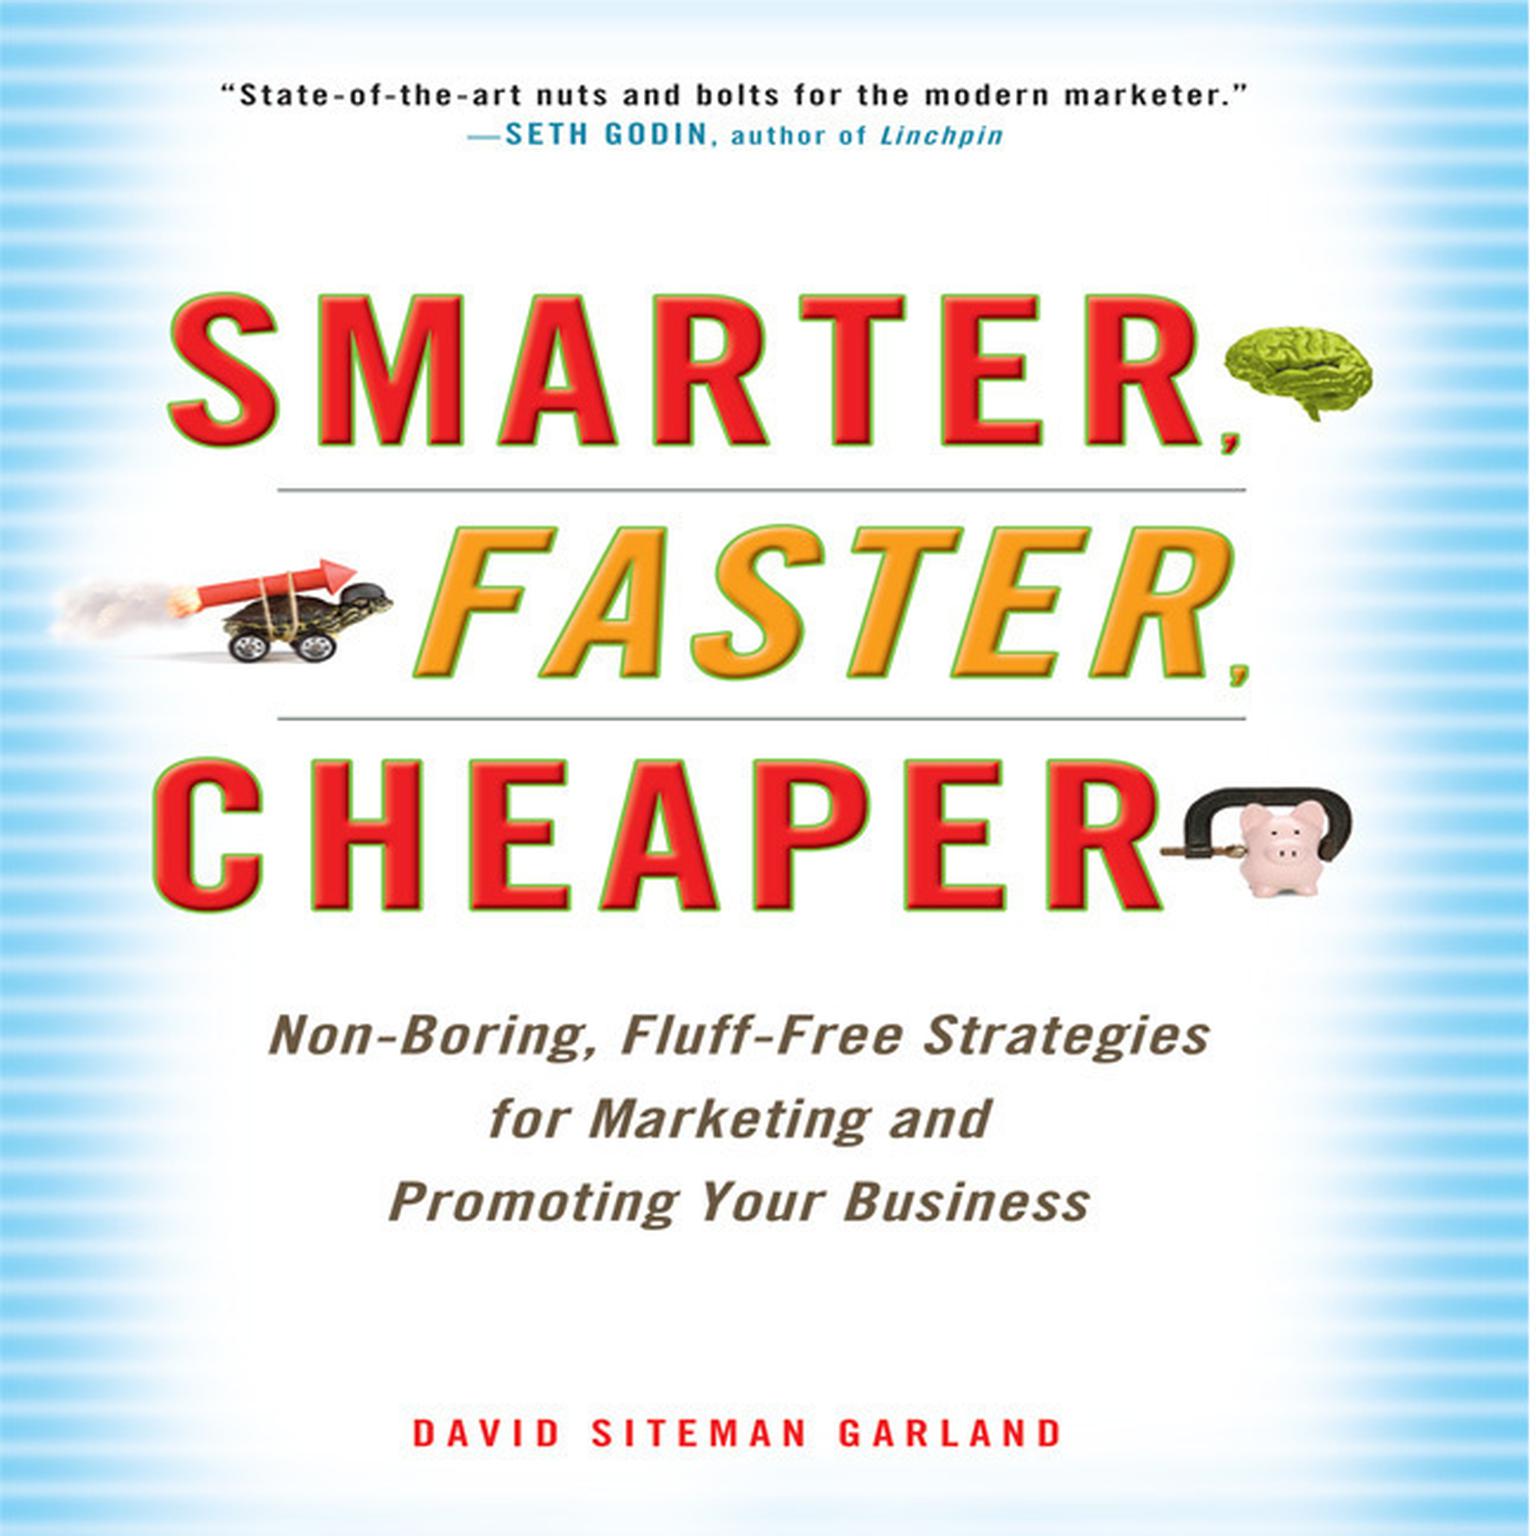 Smarter, Faster, Cheaper: Non-Boring, Fluff-Free Strategies for Marketing and Promoting Your Business Audiobook, by David Siteman Garland